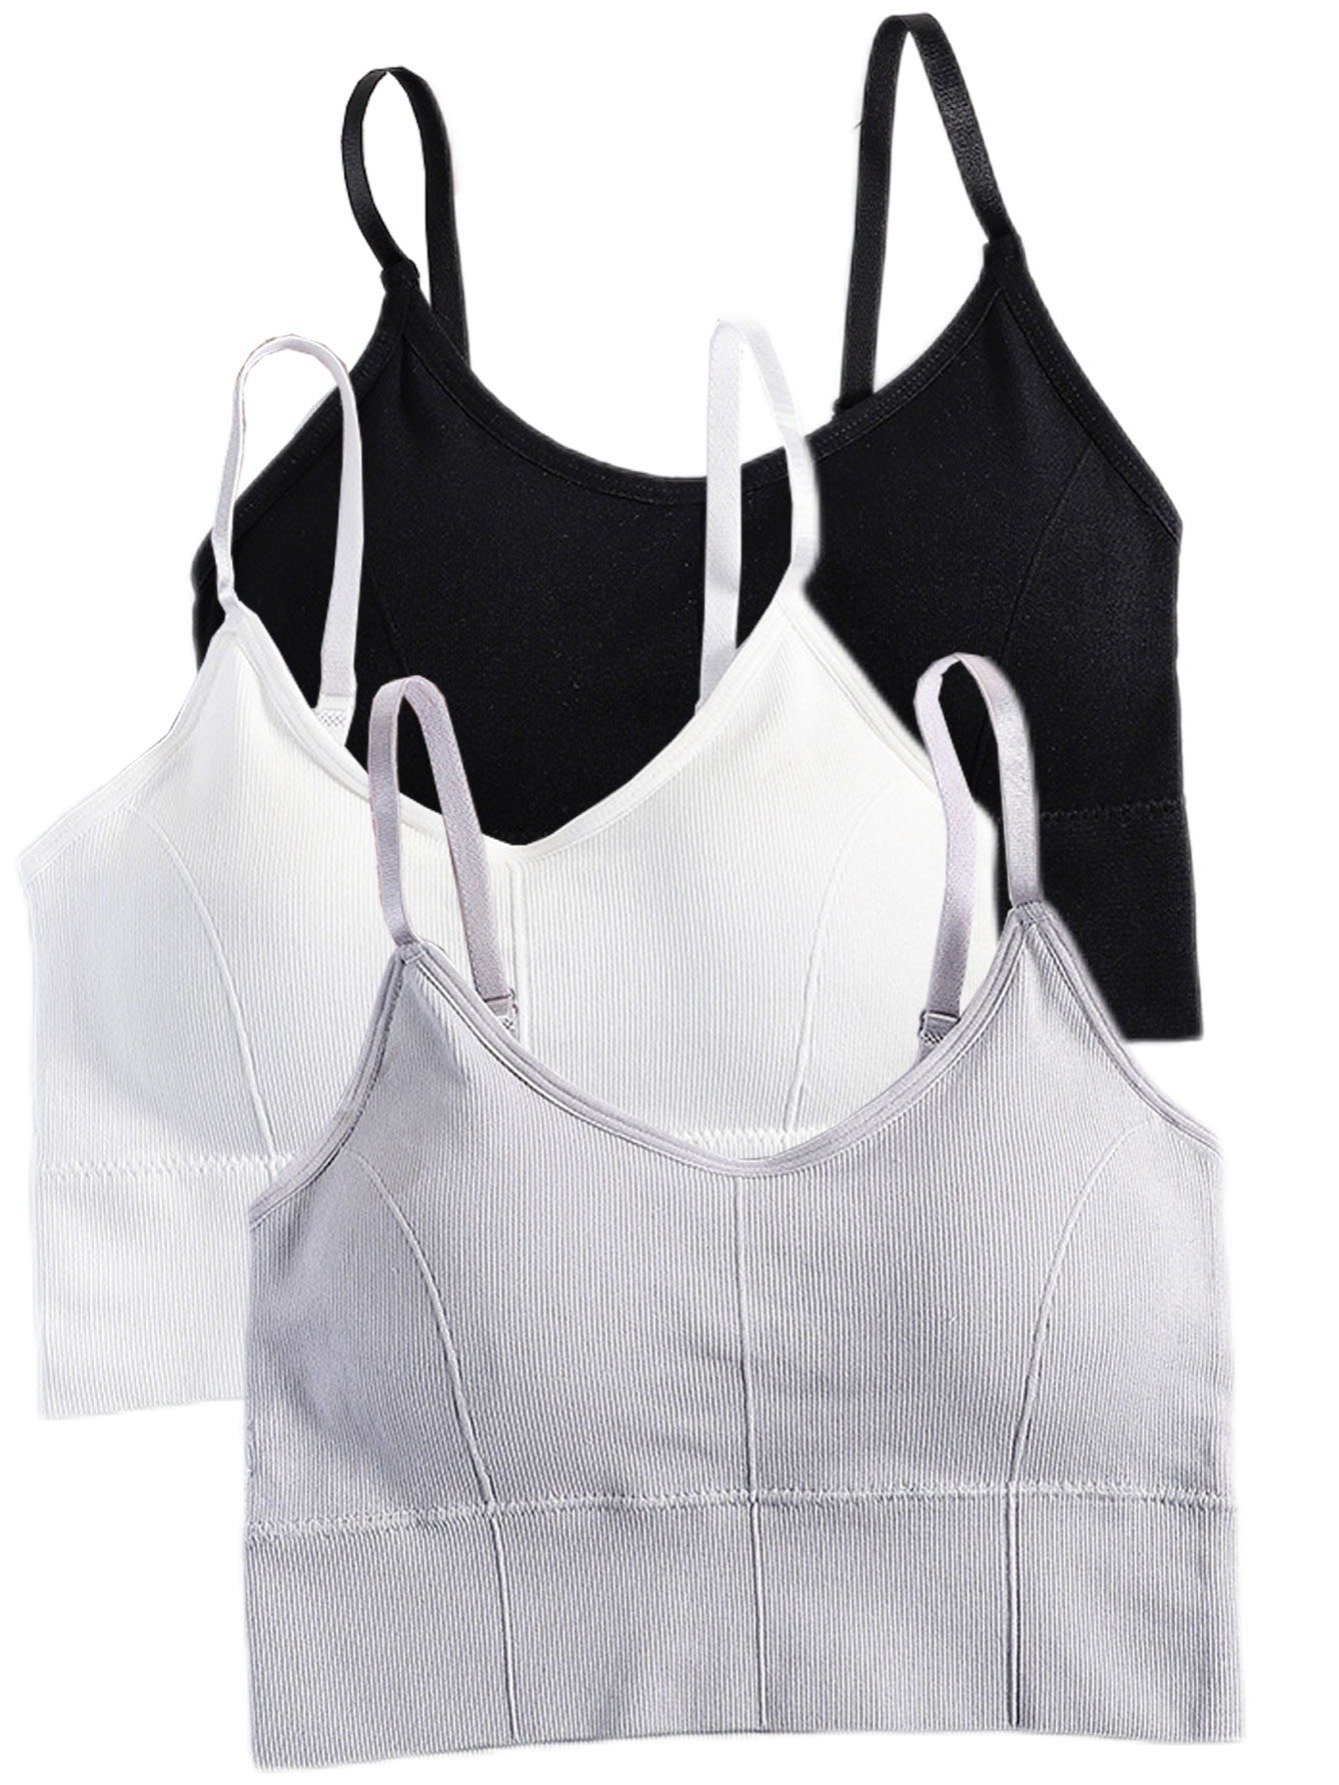 4pcs Big Girls Training Bras Fixed Cup Wireless Sports Bra 95% Cotton  Highly Stretch Comfy & Breathable Unpadded Bralette Wide Shoulder Strap For  Kids